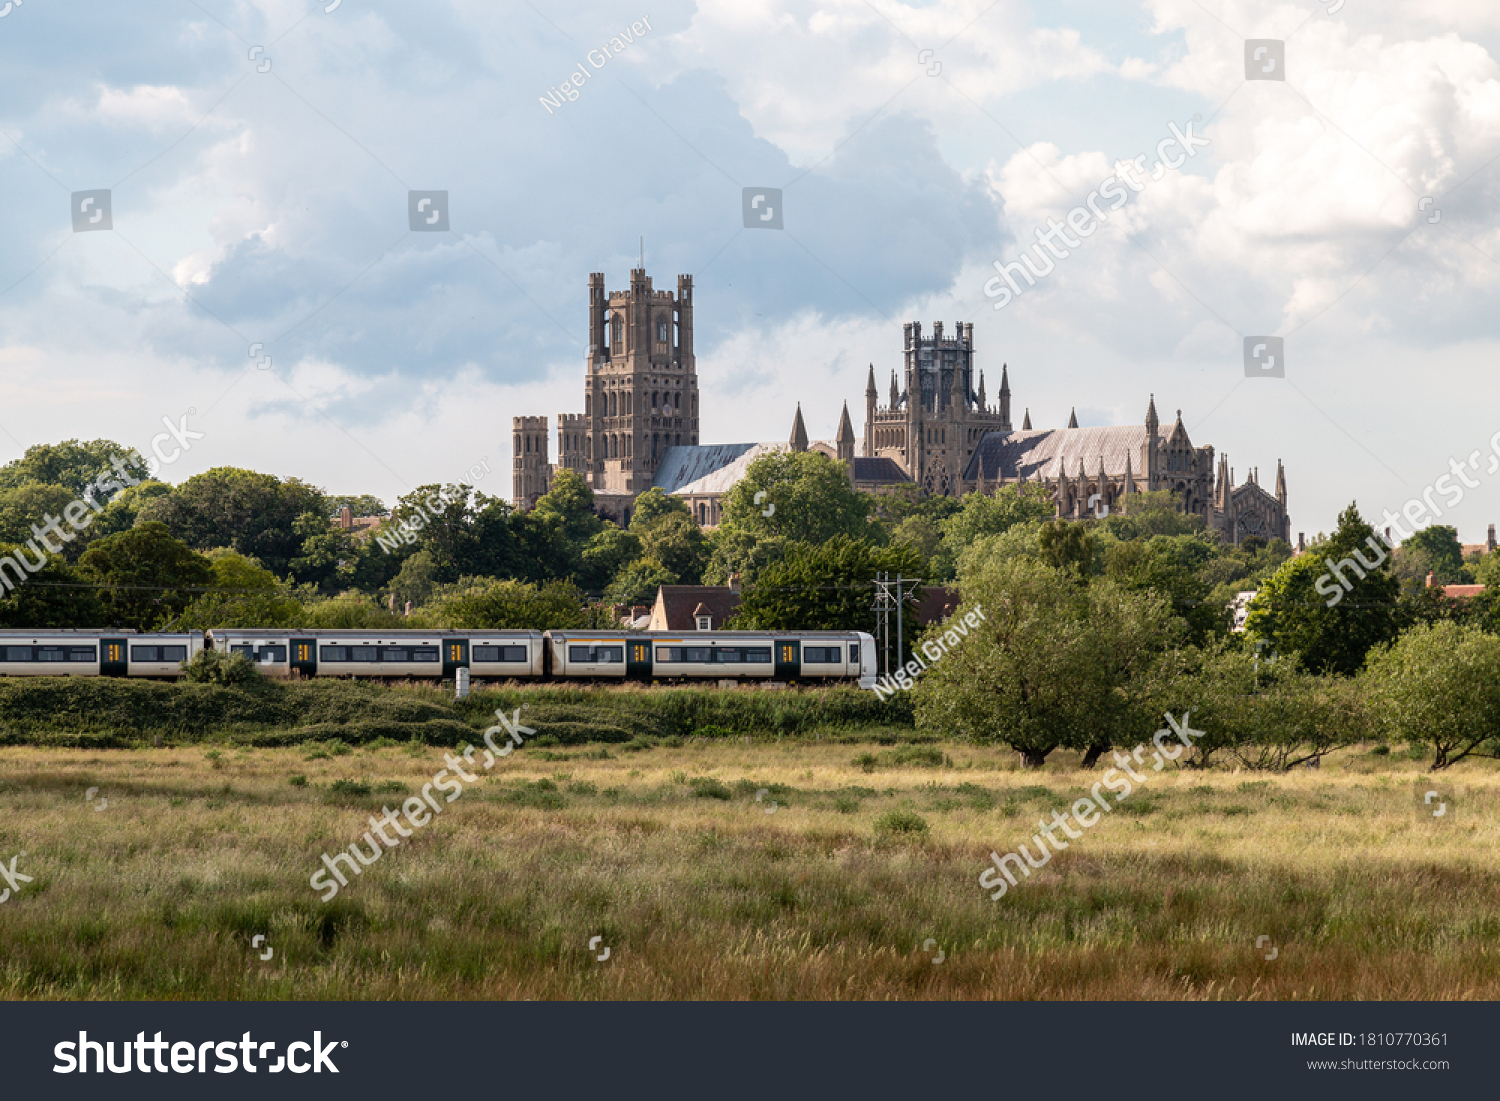 Ely Cathedral with train in foreground #1810770361